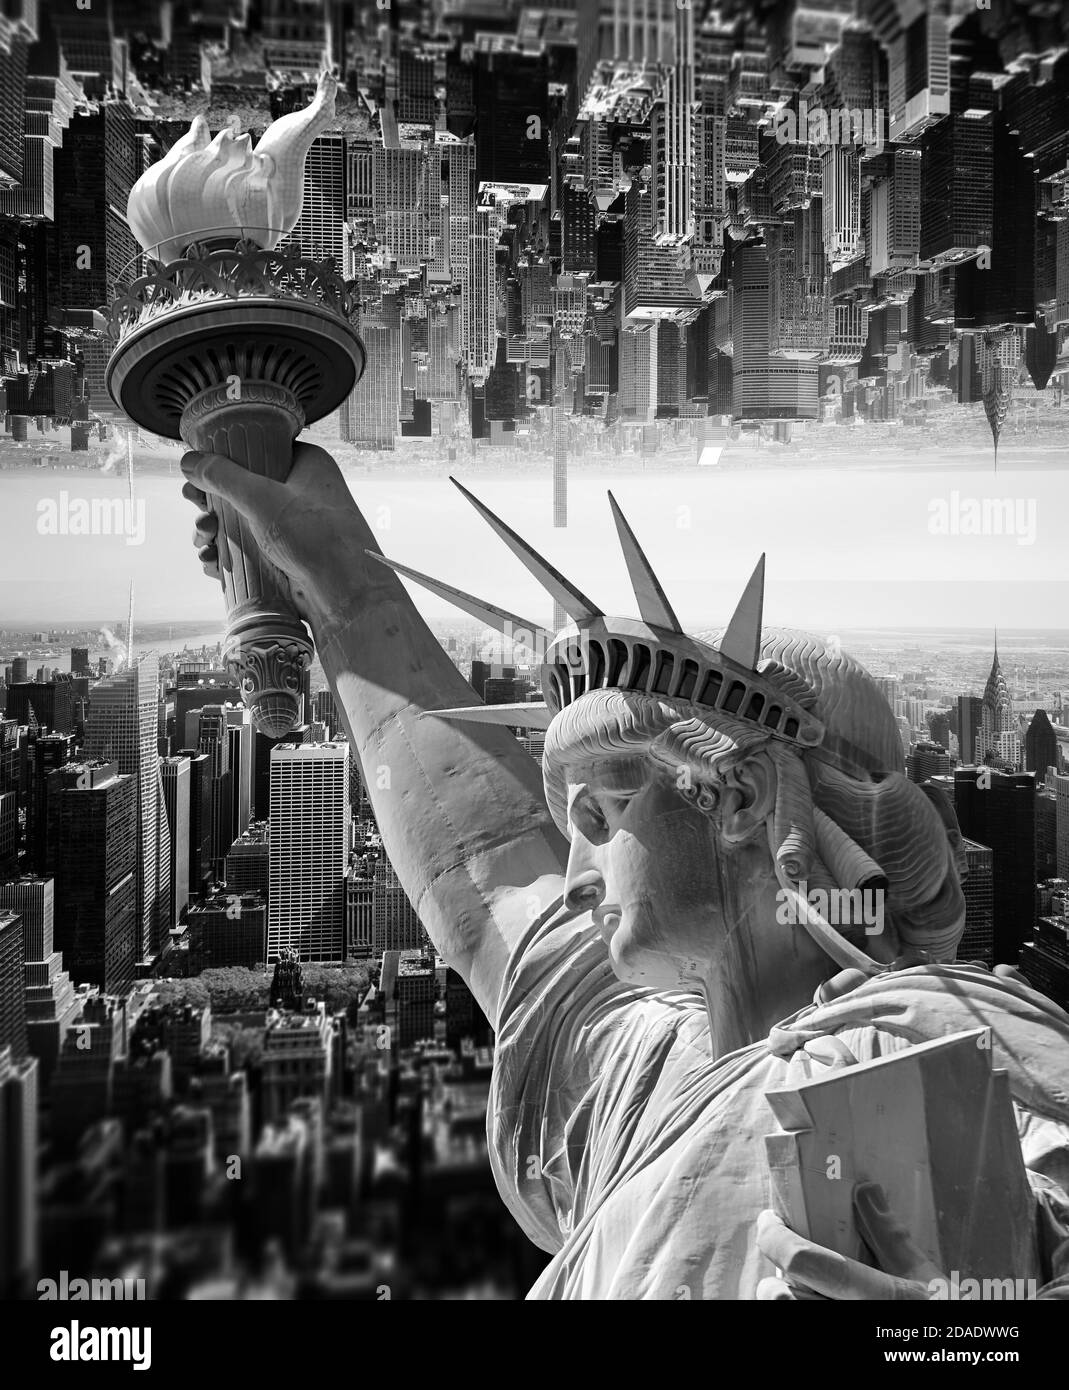 Abstract image of New York City with views of the Manhattan, Statue of Liberty and tilt shift effect Stock Photo